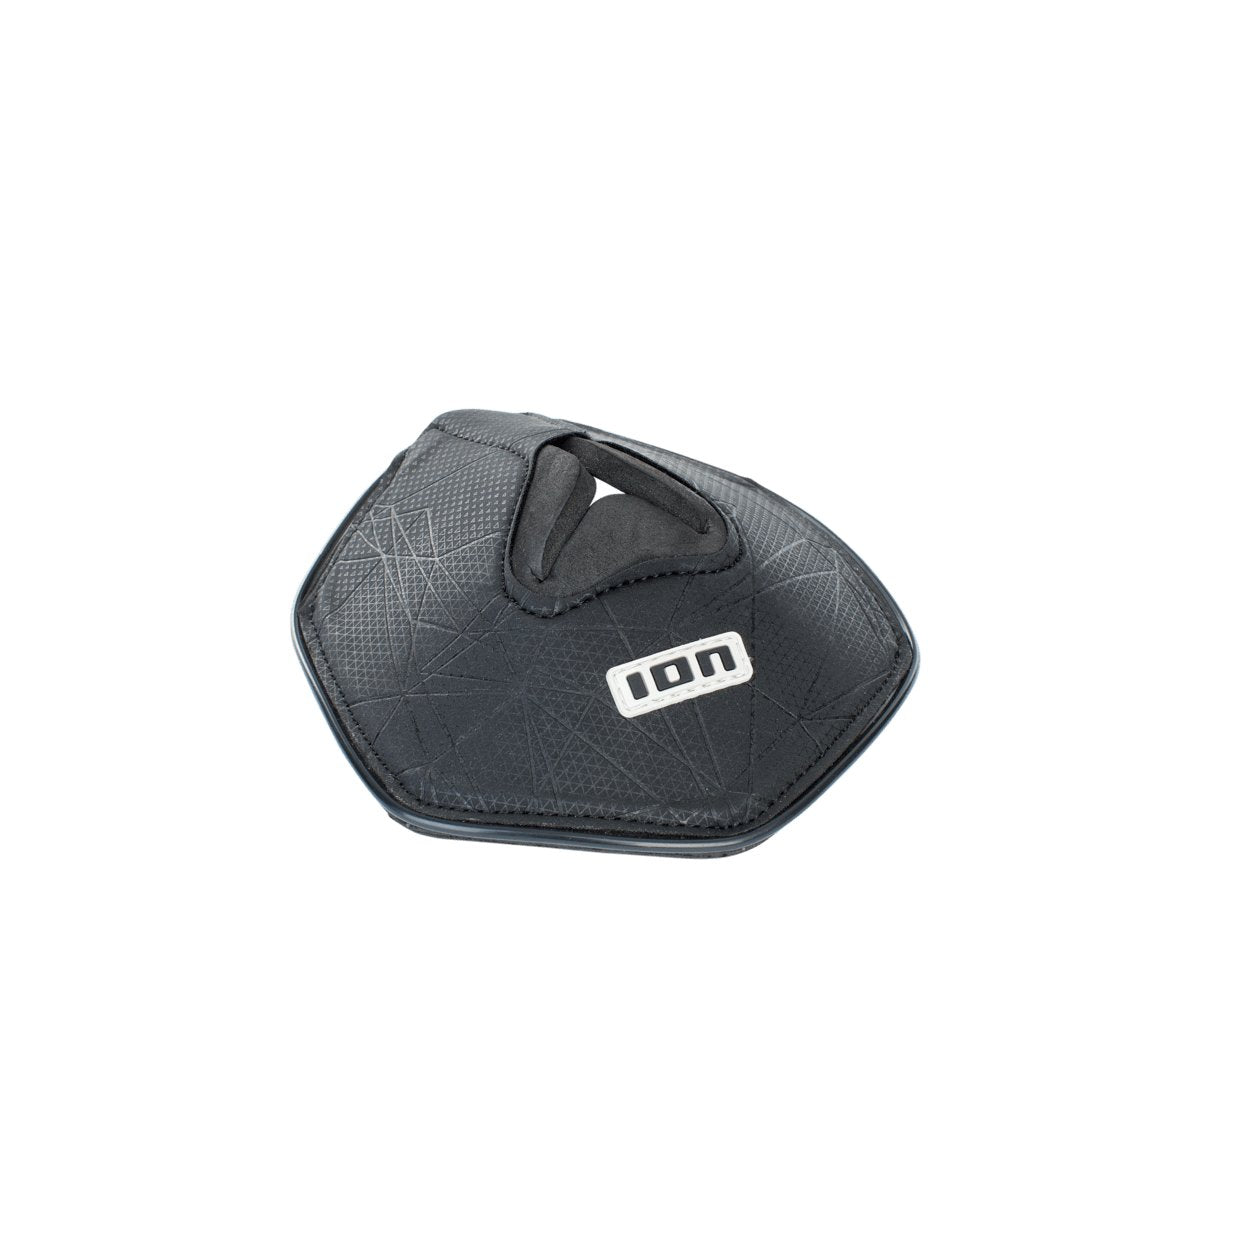 ION Mastbase Protector 2022 - Worthing Watersports - 9008415960941 - Accessories - ION Water